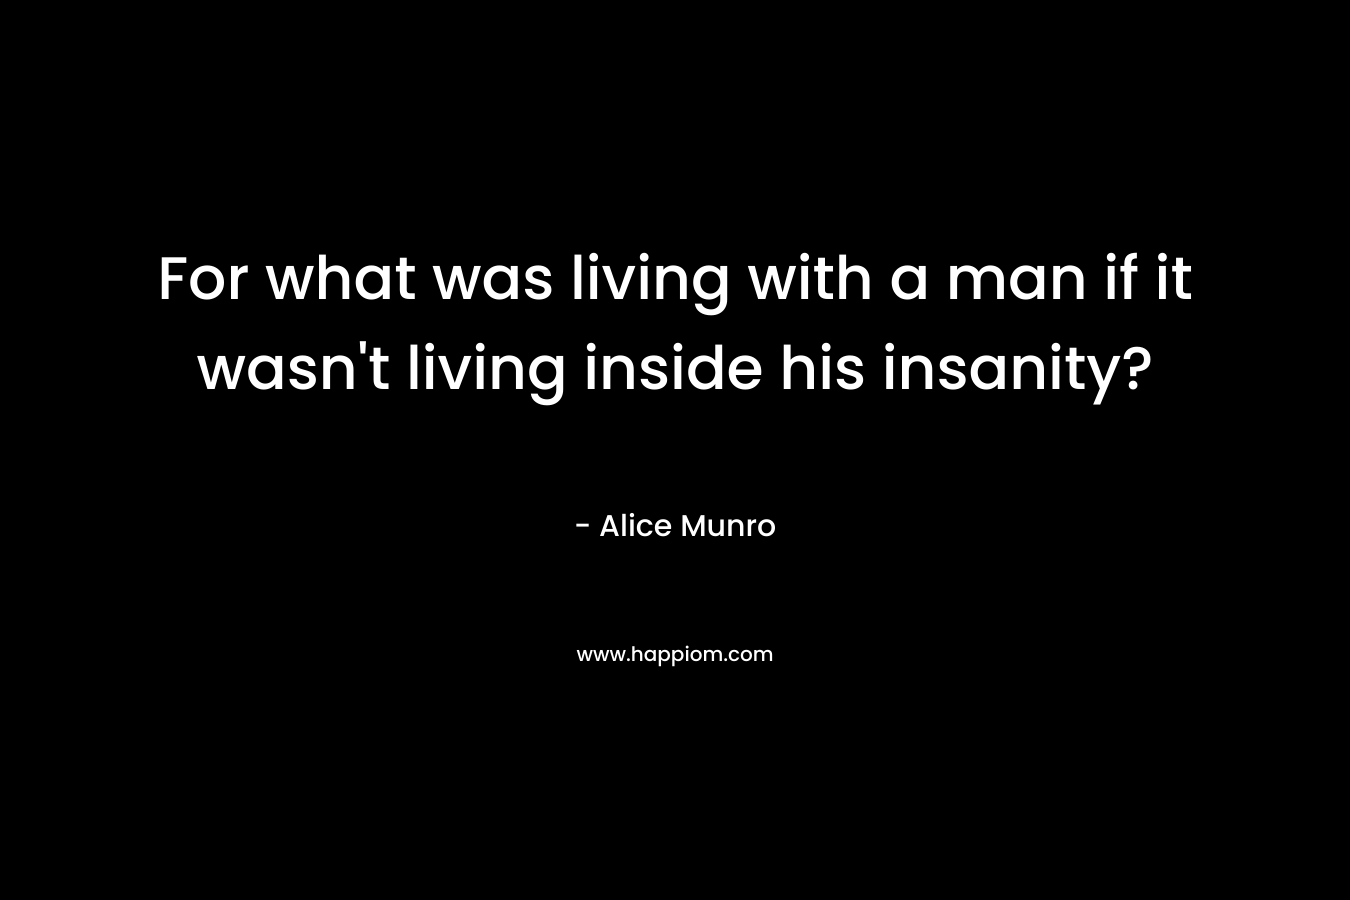 For what was living with a man if it wasn't living inside his insanity?